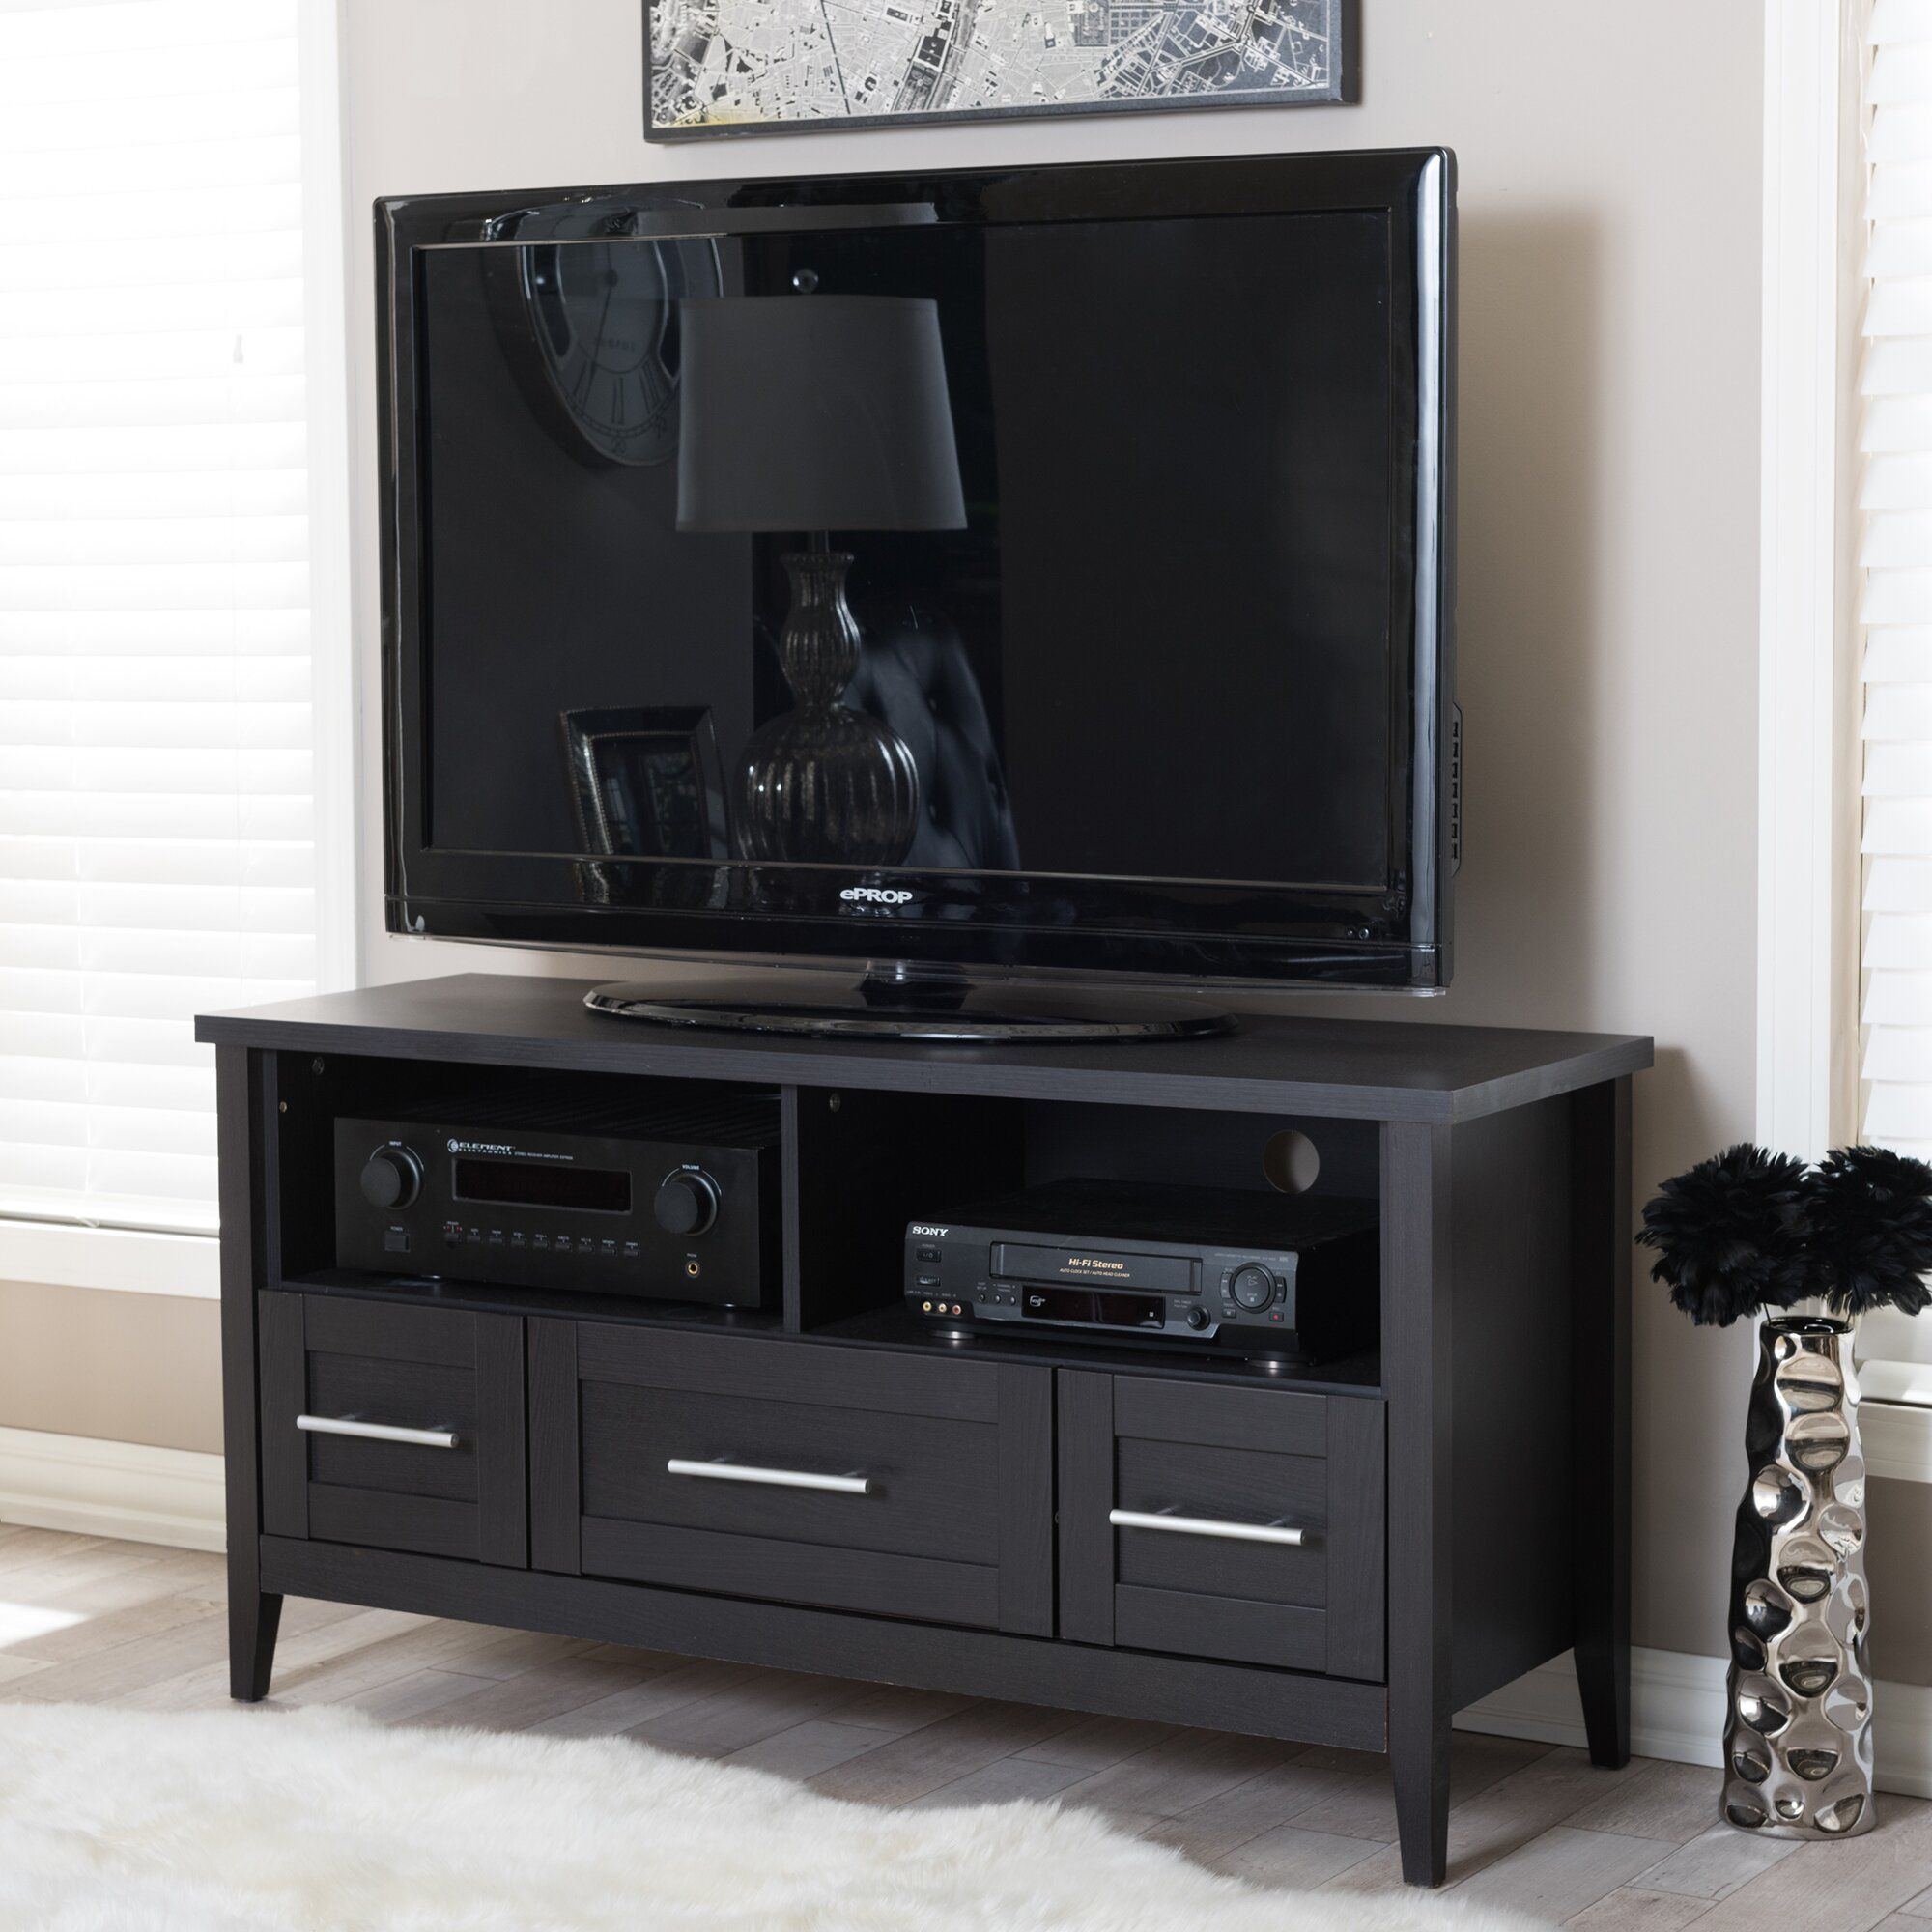 Wholesale Interiors Baxton Studio Tv Stand & Reviews | Wayfair For Cheap Oak Tv Stands (View 4 of 15)